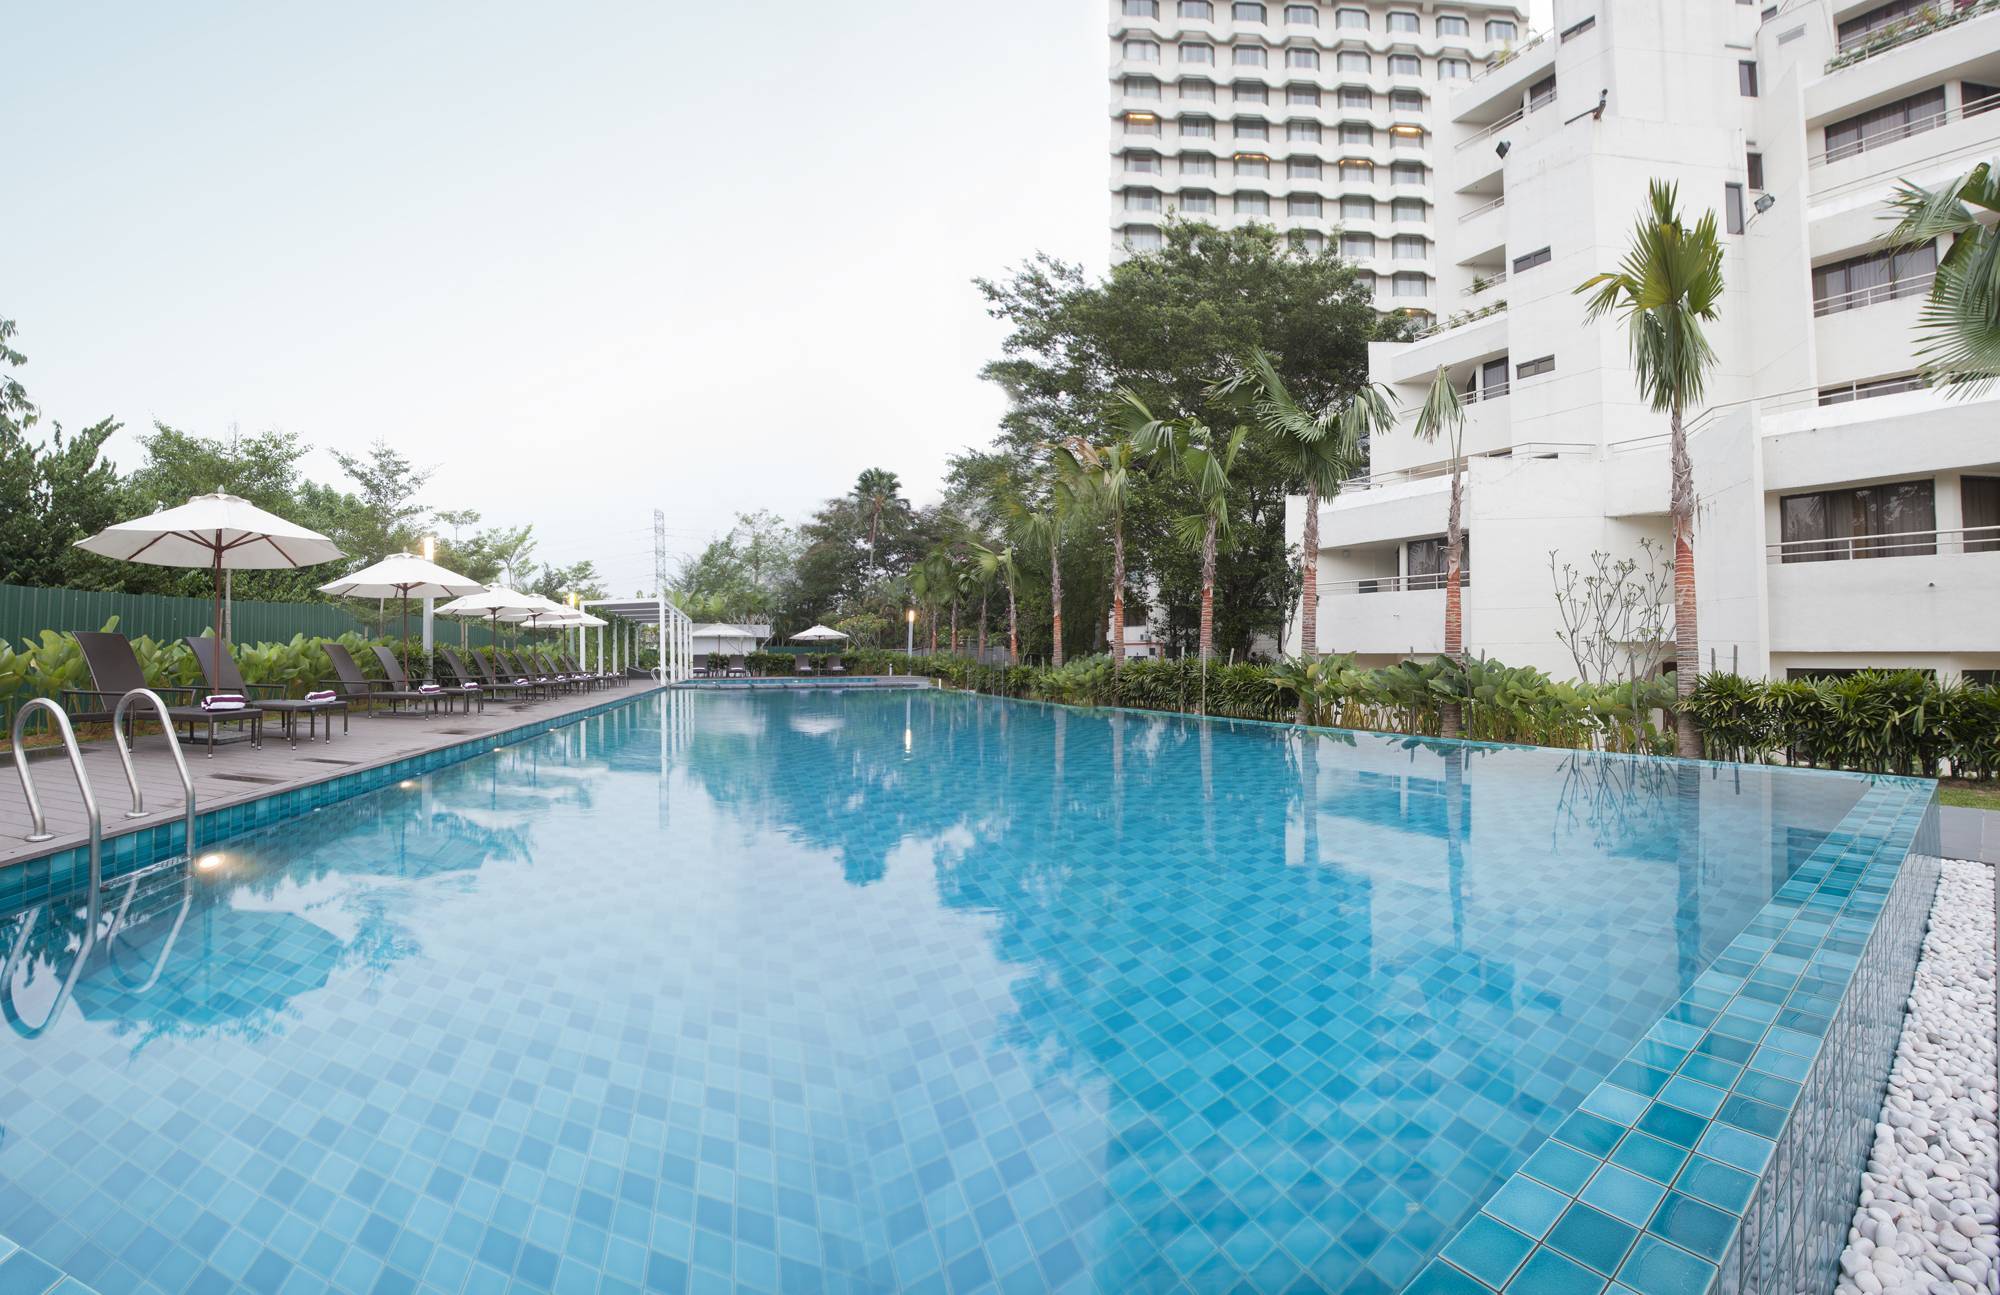 The outdoor sparkling pool, offering an inviting respite from the day's heat